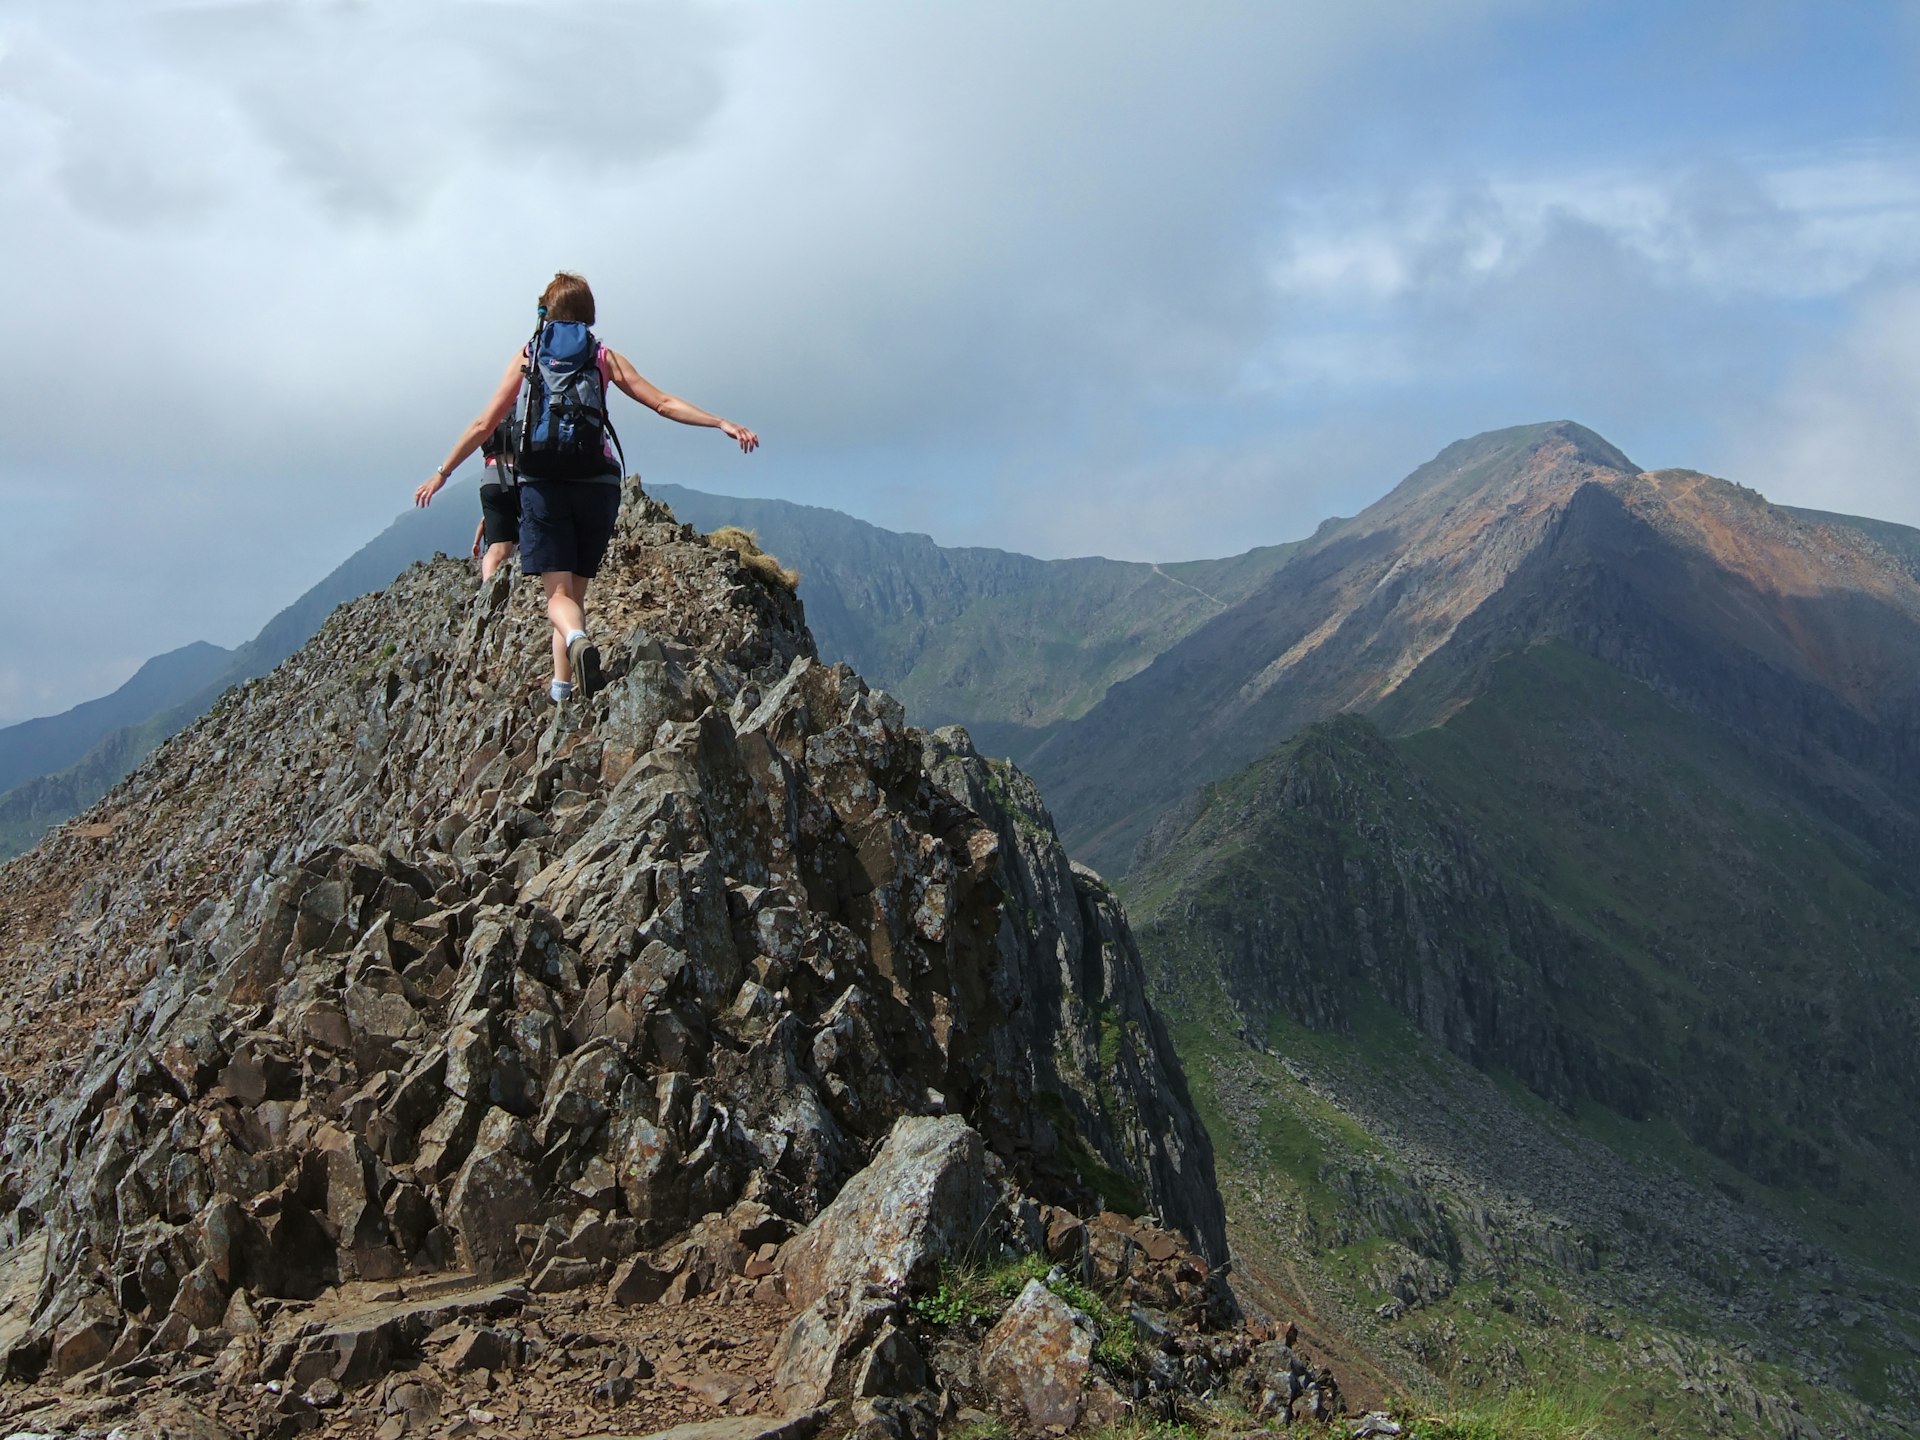 Hikers may be asked to pay a fee to climb Snowdon